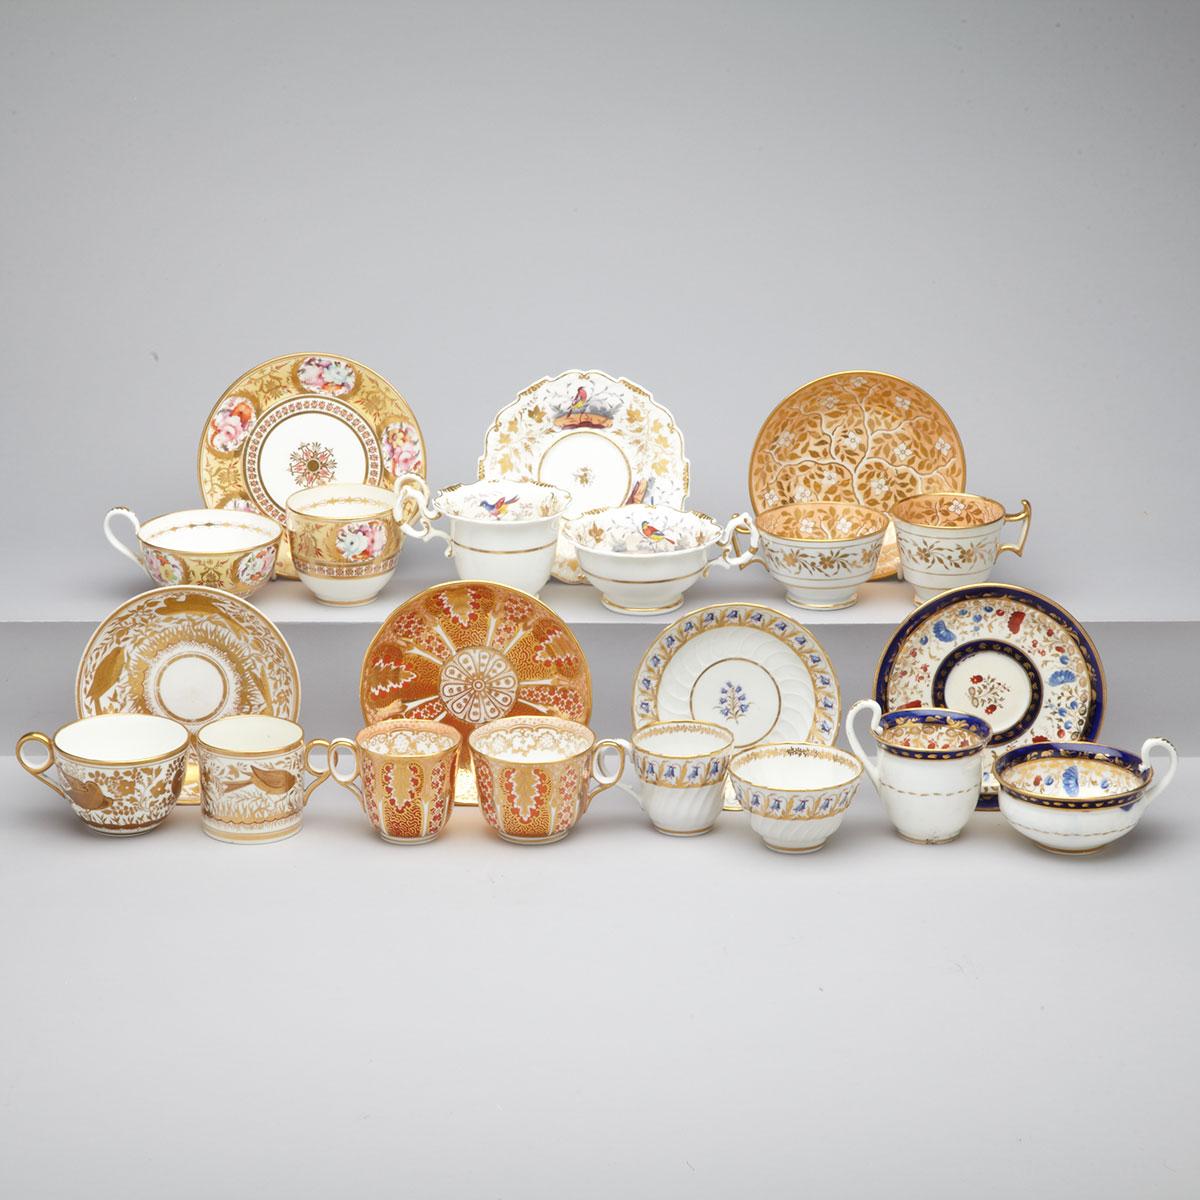 Seven Various English Porcelain Trios, late 18th/early 19th century